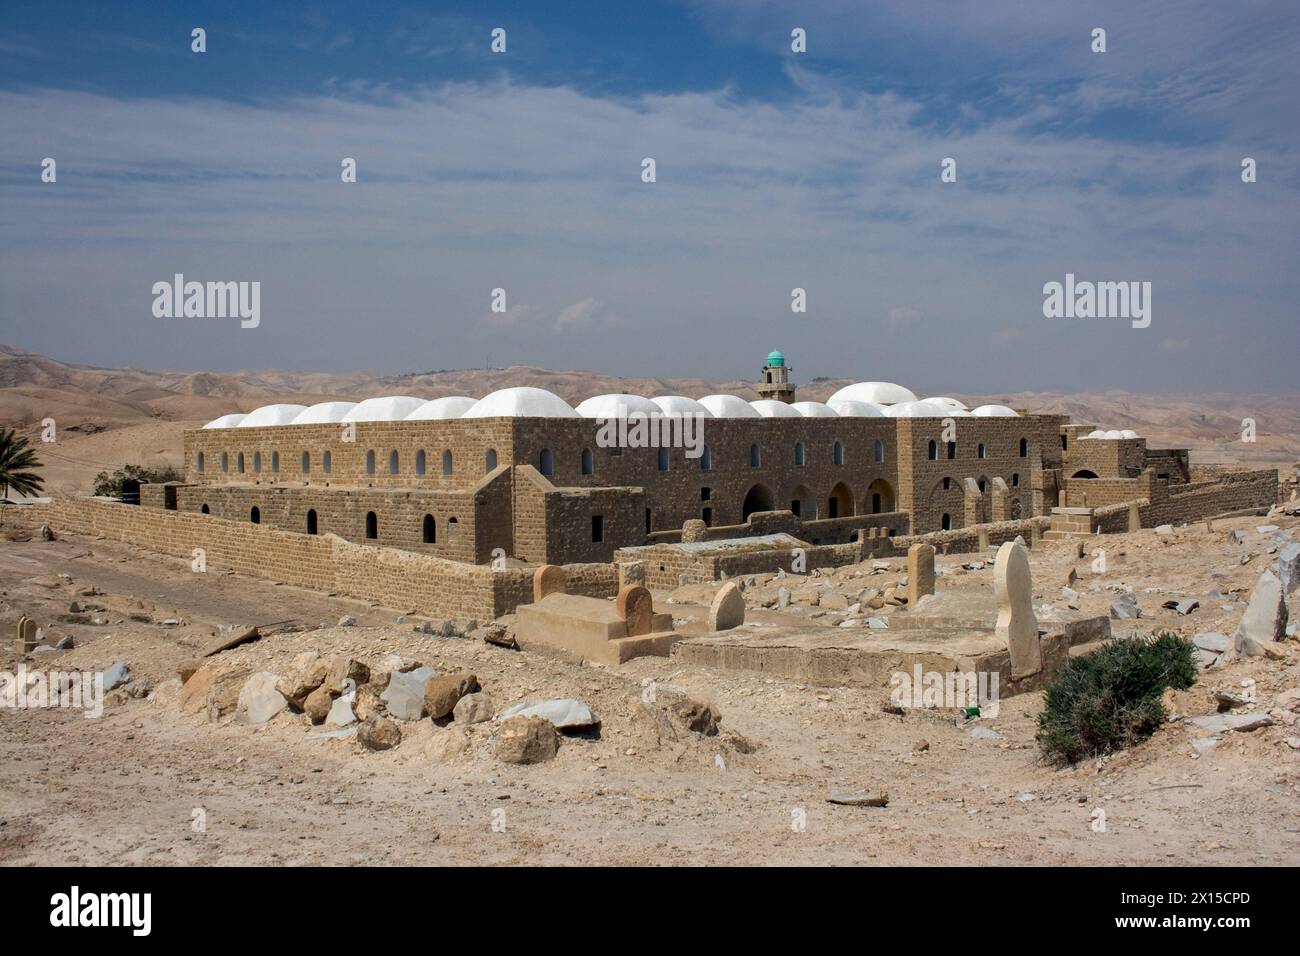 Prophet moses, Nabi Musa  is a Muslim holy site in the Judean Desert, about 15 miles east of Jerusalem. Stock Photo